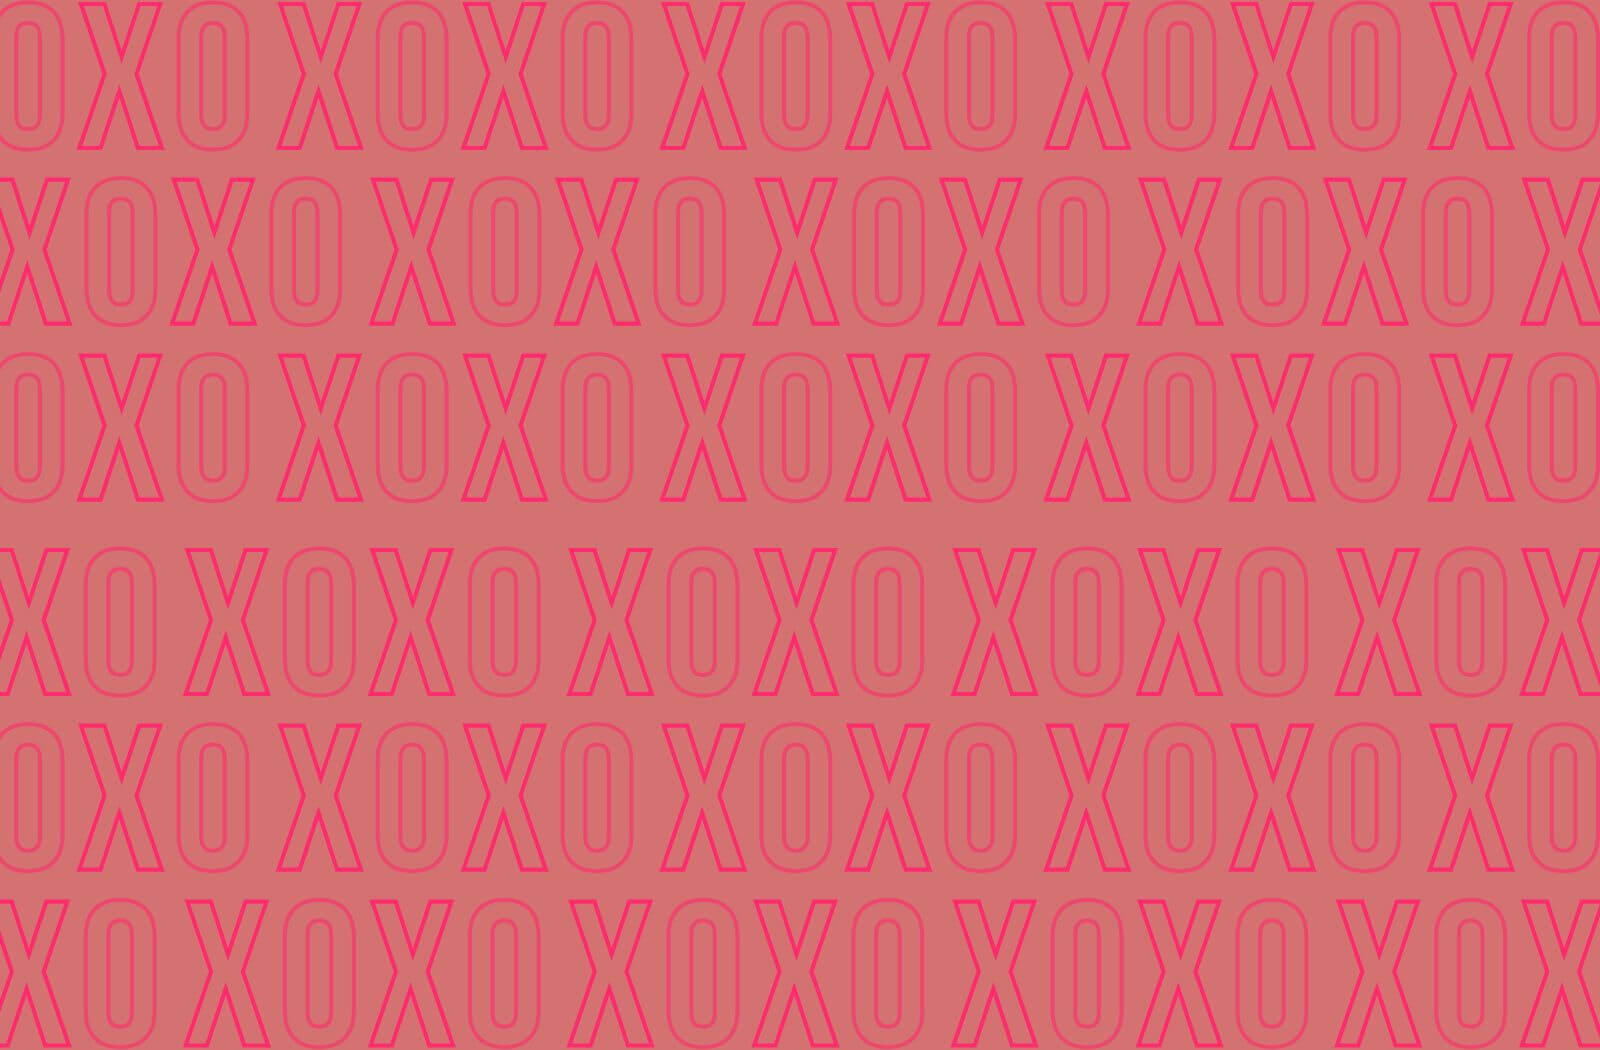 XO signs on a Pink Background